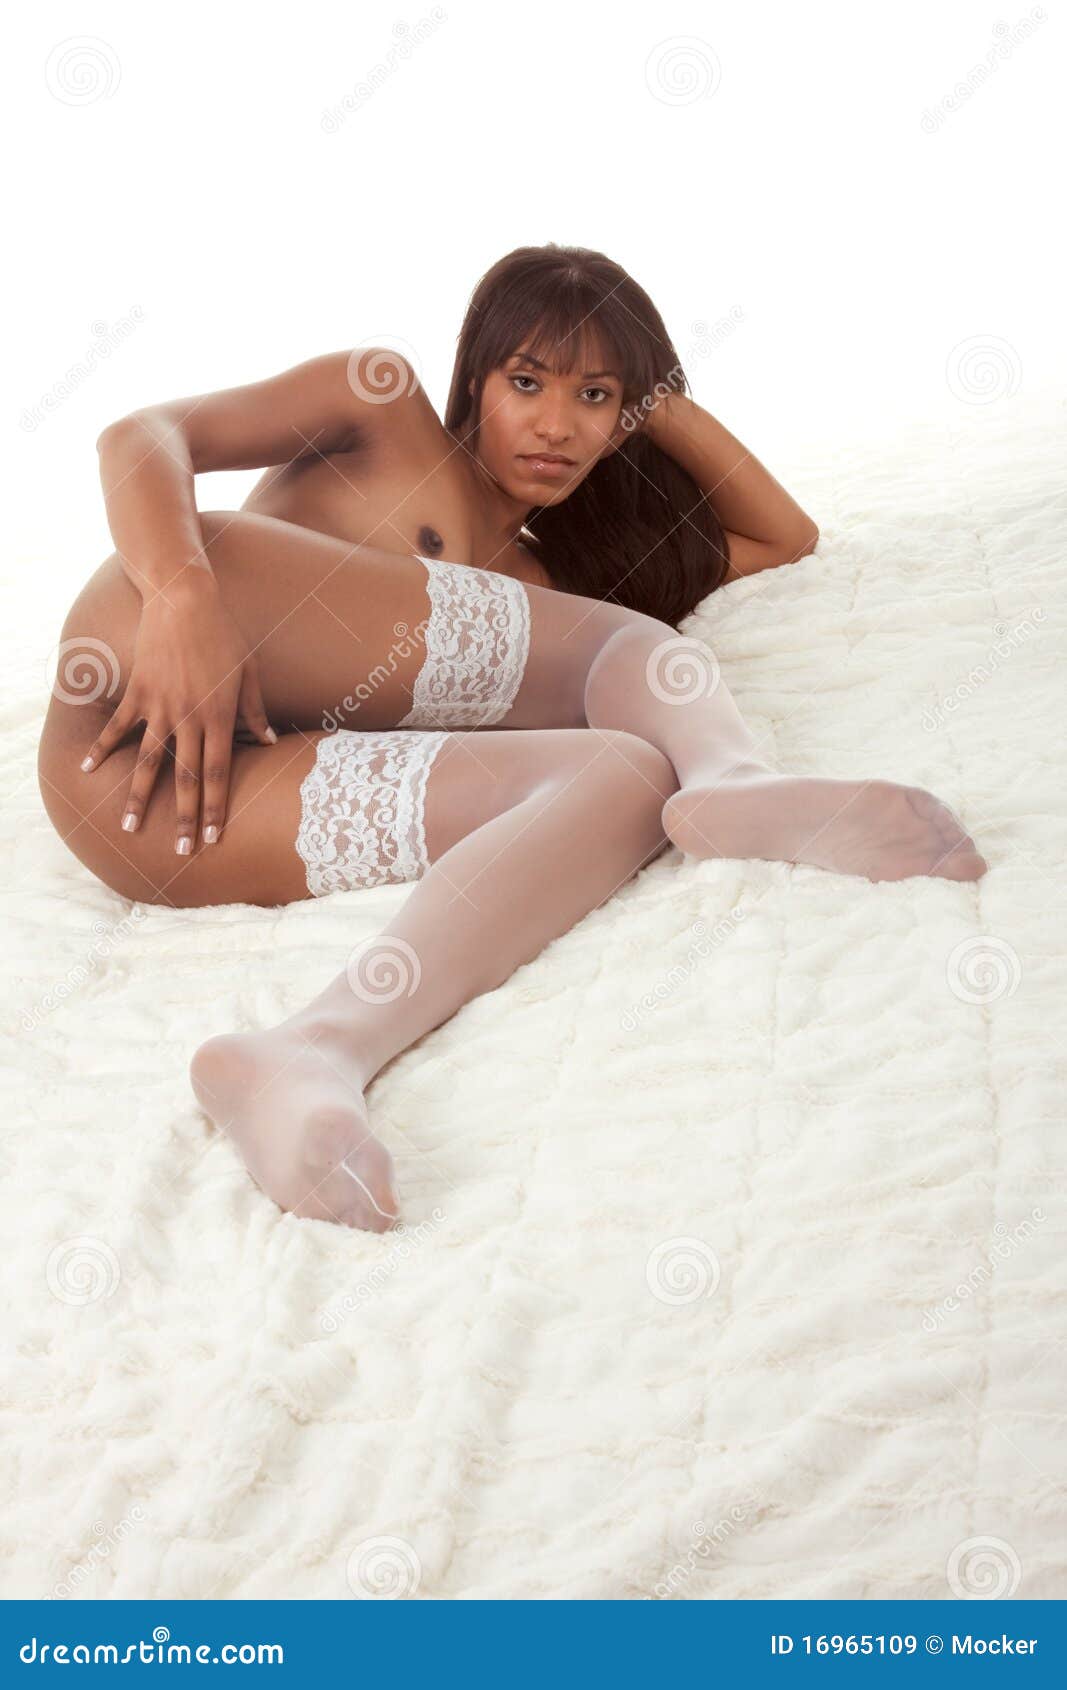 Nude pic for african on bed